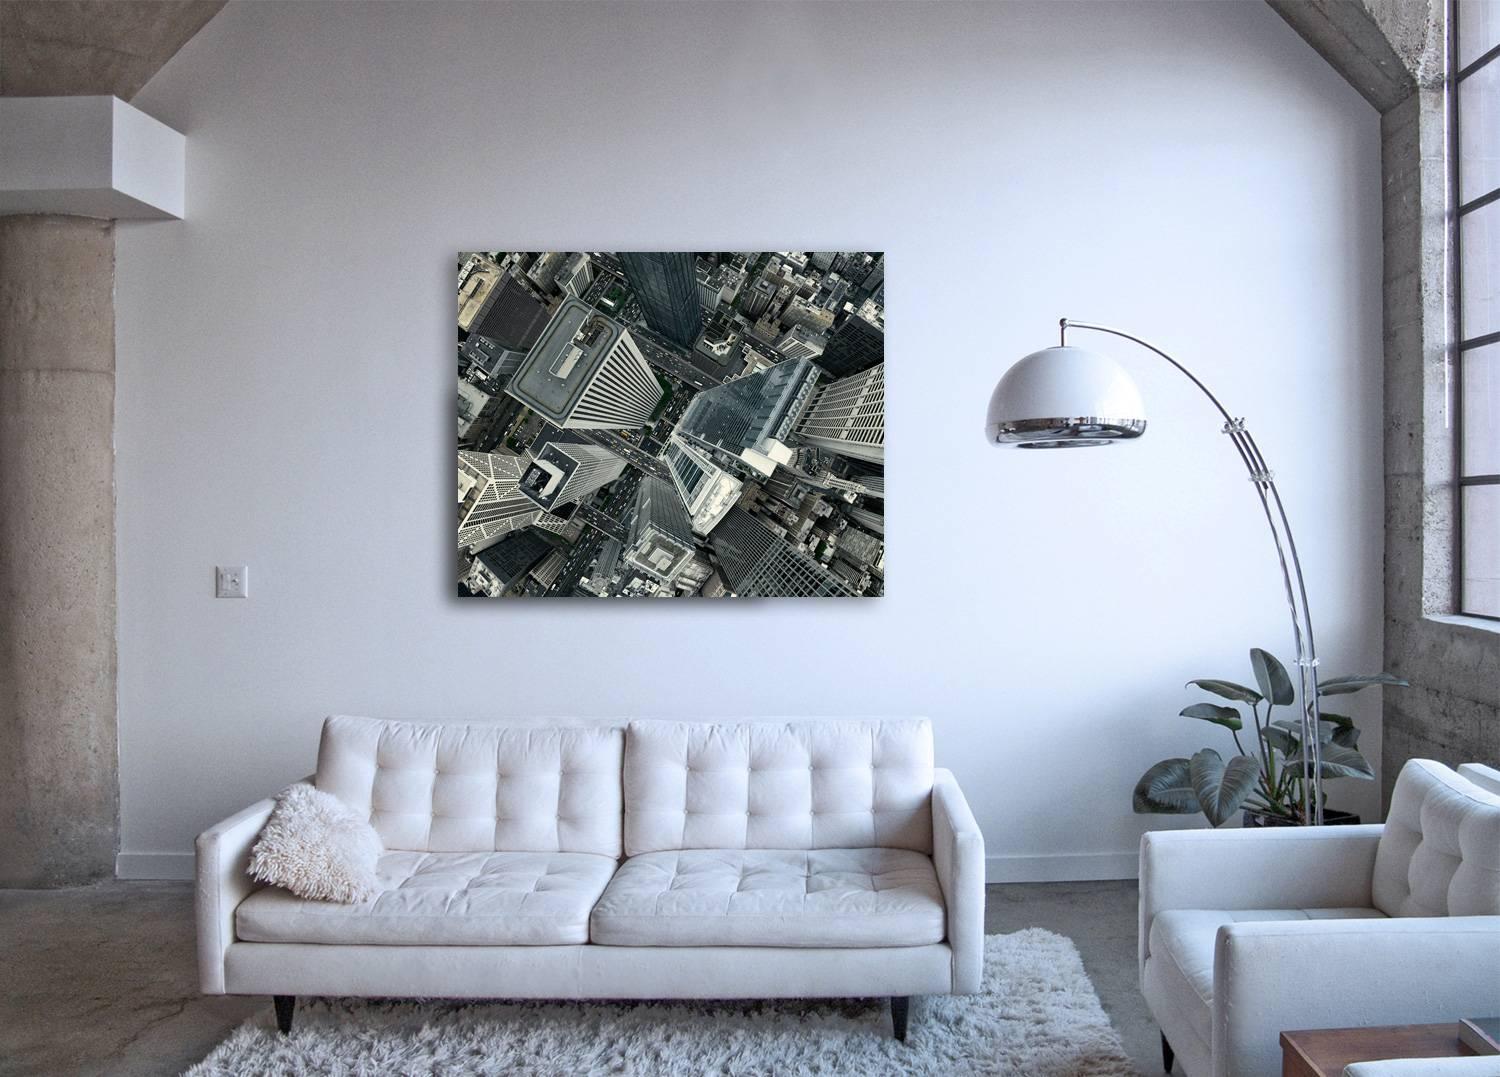 Flying High - large scale photograph of urban landscape from birds eye viewpoint - Photograph by Christian Stoll